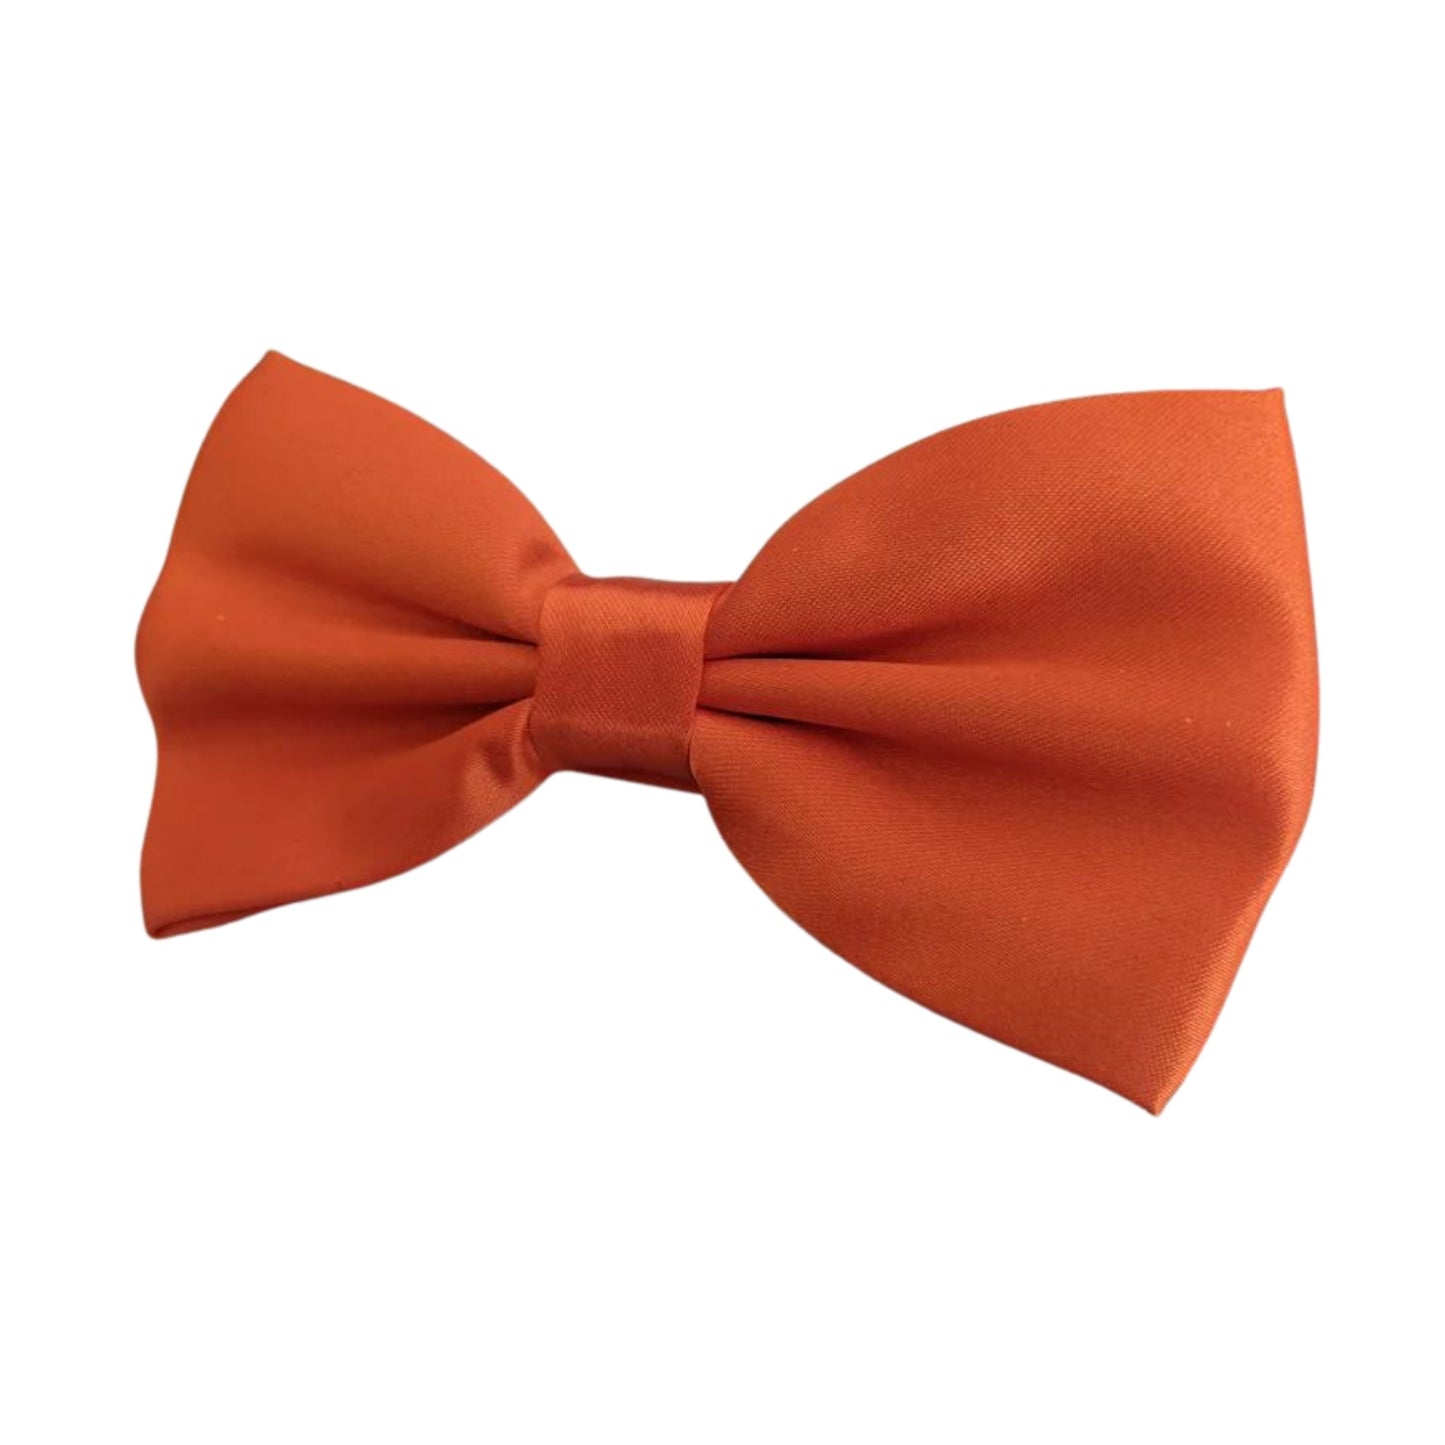 YOUTH ROBE's Solid Bow-Tie (Orange) - YOUTH ROBE